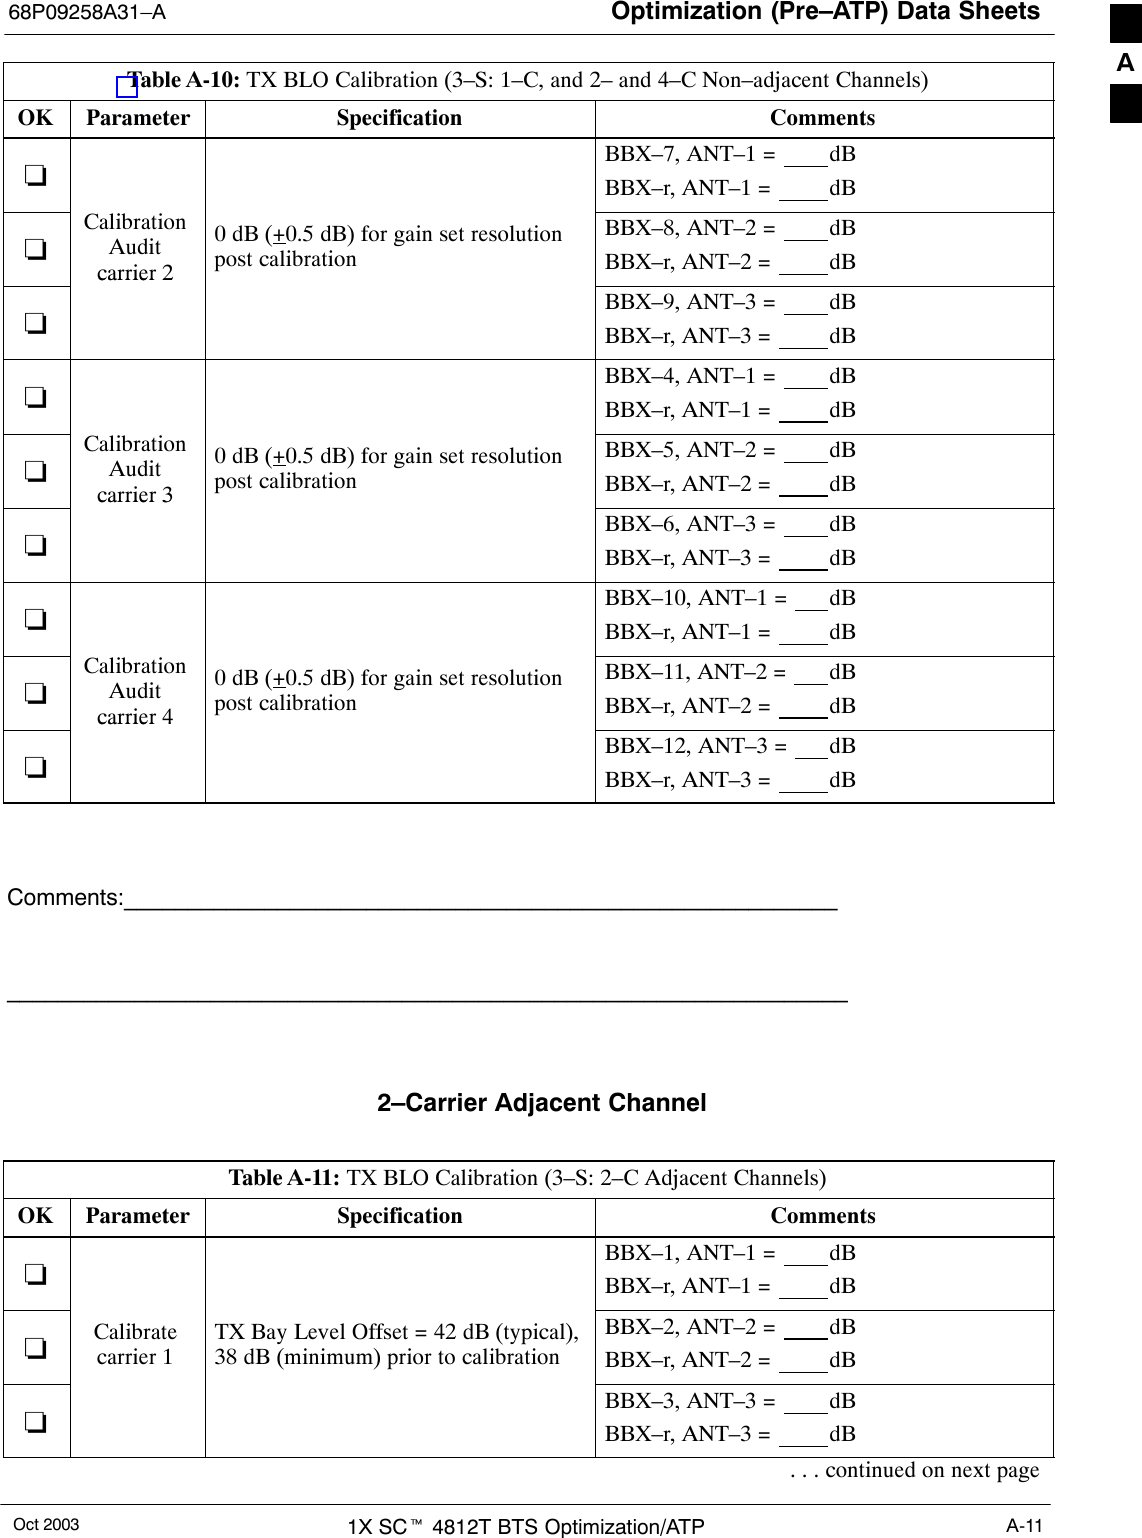 Optimization (Pre–ATP) Data Sheets68P09258A31–AOct 2003 1X SCt 4812T BTS Optimization/ATP A-11Table A-10: TX BLO Calibration (3–S: 1–C, and 2– and 4–C Non–adjacent Channels)OK CommentsSpecificationParameter−BBX–7, ANT–1 =  dBBBX–r, ANT–1 =  dB−CalibrationAuditcarrier 20 dB (+0.5 dB) for gain set resolutionpost calibrationBBX–8, ANT–2 =  dBBBX–r, ANT–2 =  dB−carrier 2BBX–9, ANT–3 =  dBBBX–r, ANT–3 =  dB−BBX–4, ANT–1 =  dBBBX–r, ANT–1 =  dB−CalibrationAuditcarrier 30 dB (+0.5 dB) for gain set resolutionpost calibrationBBX–5, ANT–2 =  dBBBX–r, ANT–2 =  dB−carrier 3BBX–6, ANT–3 =  dBBBX–r, ANT–3 =  dB−BBX–10, ANT–1 =  dBBBX–r, ANT–1 =  dB−CalibrationAuditcarrier 40 dB (+0.5 dB) for gain set resolutionpost calibrationBBX–11, ANT–2 =  dBBBX–r, ANT–2 =  dB−carrier 4BBX–12, ANT–3 =  dBBBX–r, ANT–3 =  dB Comments:__________________________________________________________________________________________________________________________2–Carrier Adjacent ChannelTable A-11: TX BLO Calibration (3–S: 2–C Adjacent Channels)OK Parameter Specification Comments−BBX–1, ANT–1 =  dBBBX–r, ANT–1 =  dB−Calibratecarrier 1TX Bay Level Offset = 42 dB (typical),38 dB (minimum) prior to calibrationBBX–2, ANT–2 =  dBBBX–r, ANT–2 =  dB−BBX–3, ANT–3 =  dBBBX–r, ANT–3 =  dB. . . continued on next pageA